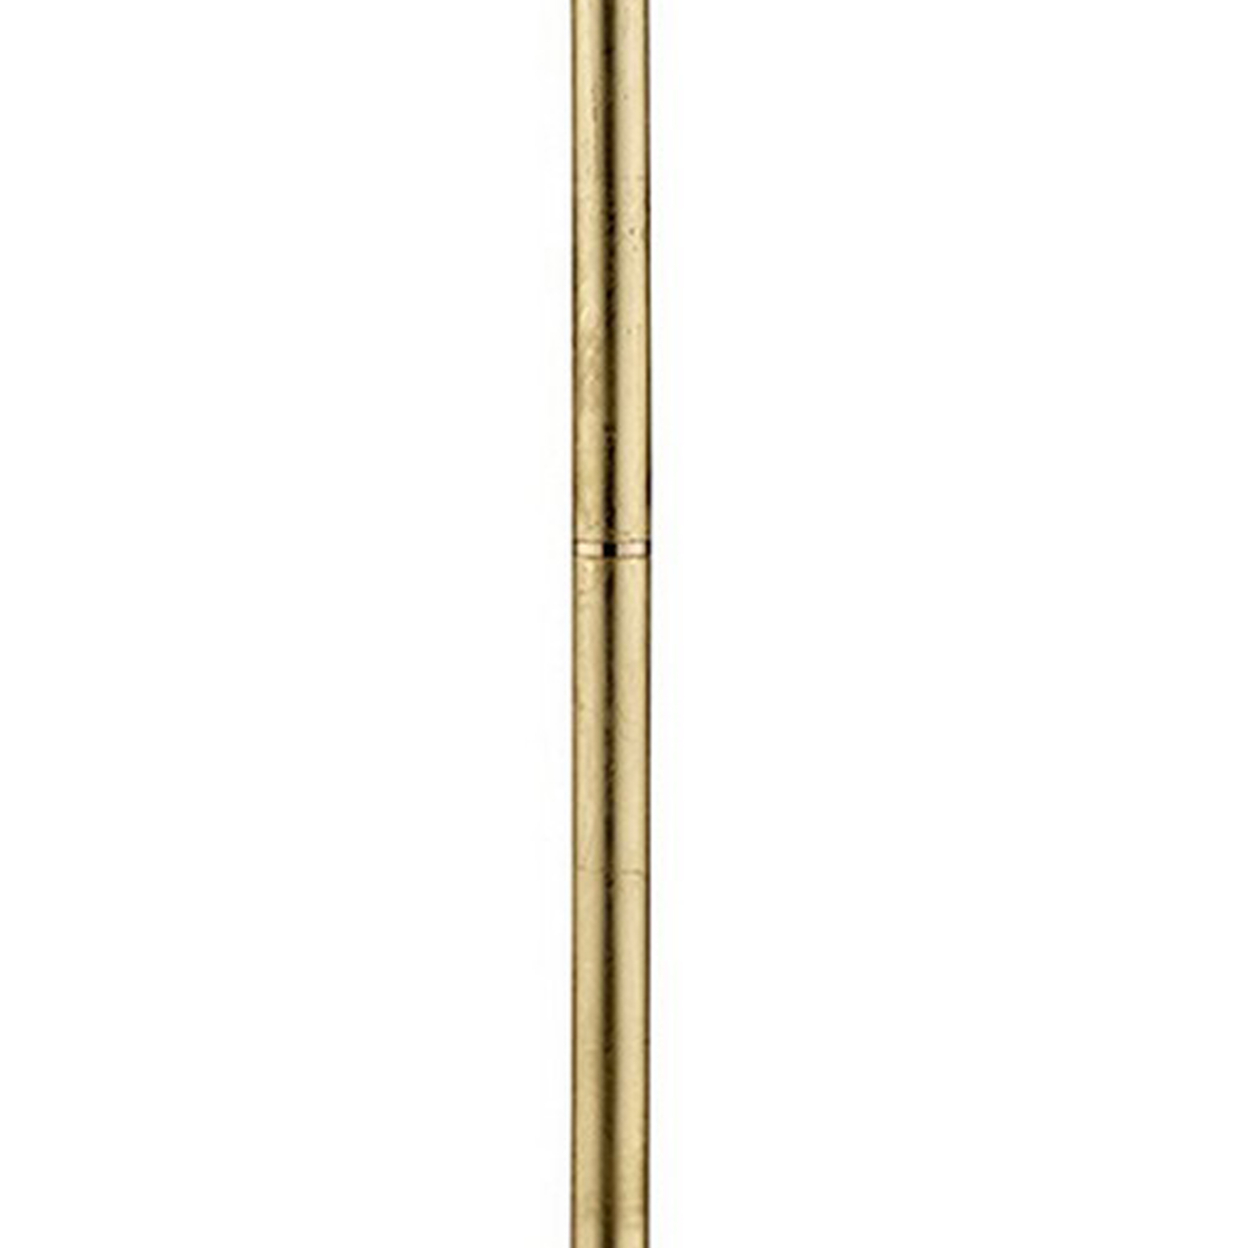 Floor Lamp With Hanging Crystal Accents, White And Gold- Saltoro Sherpi